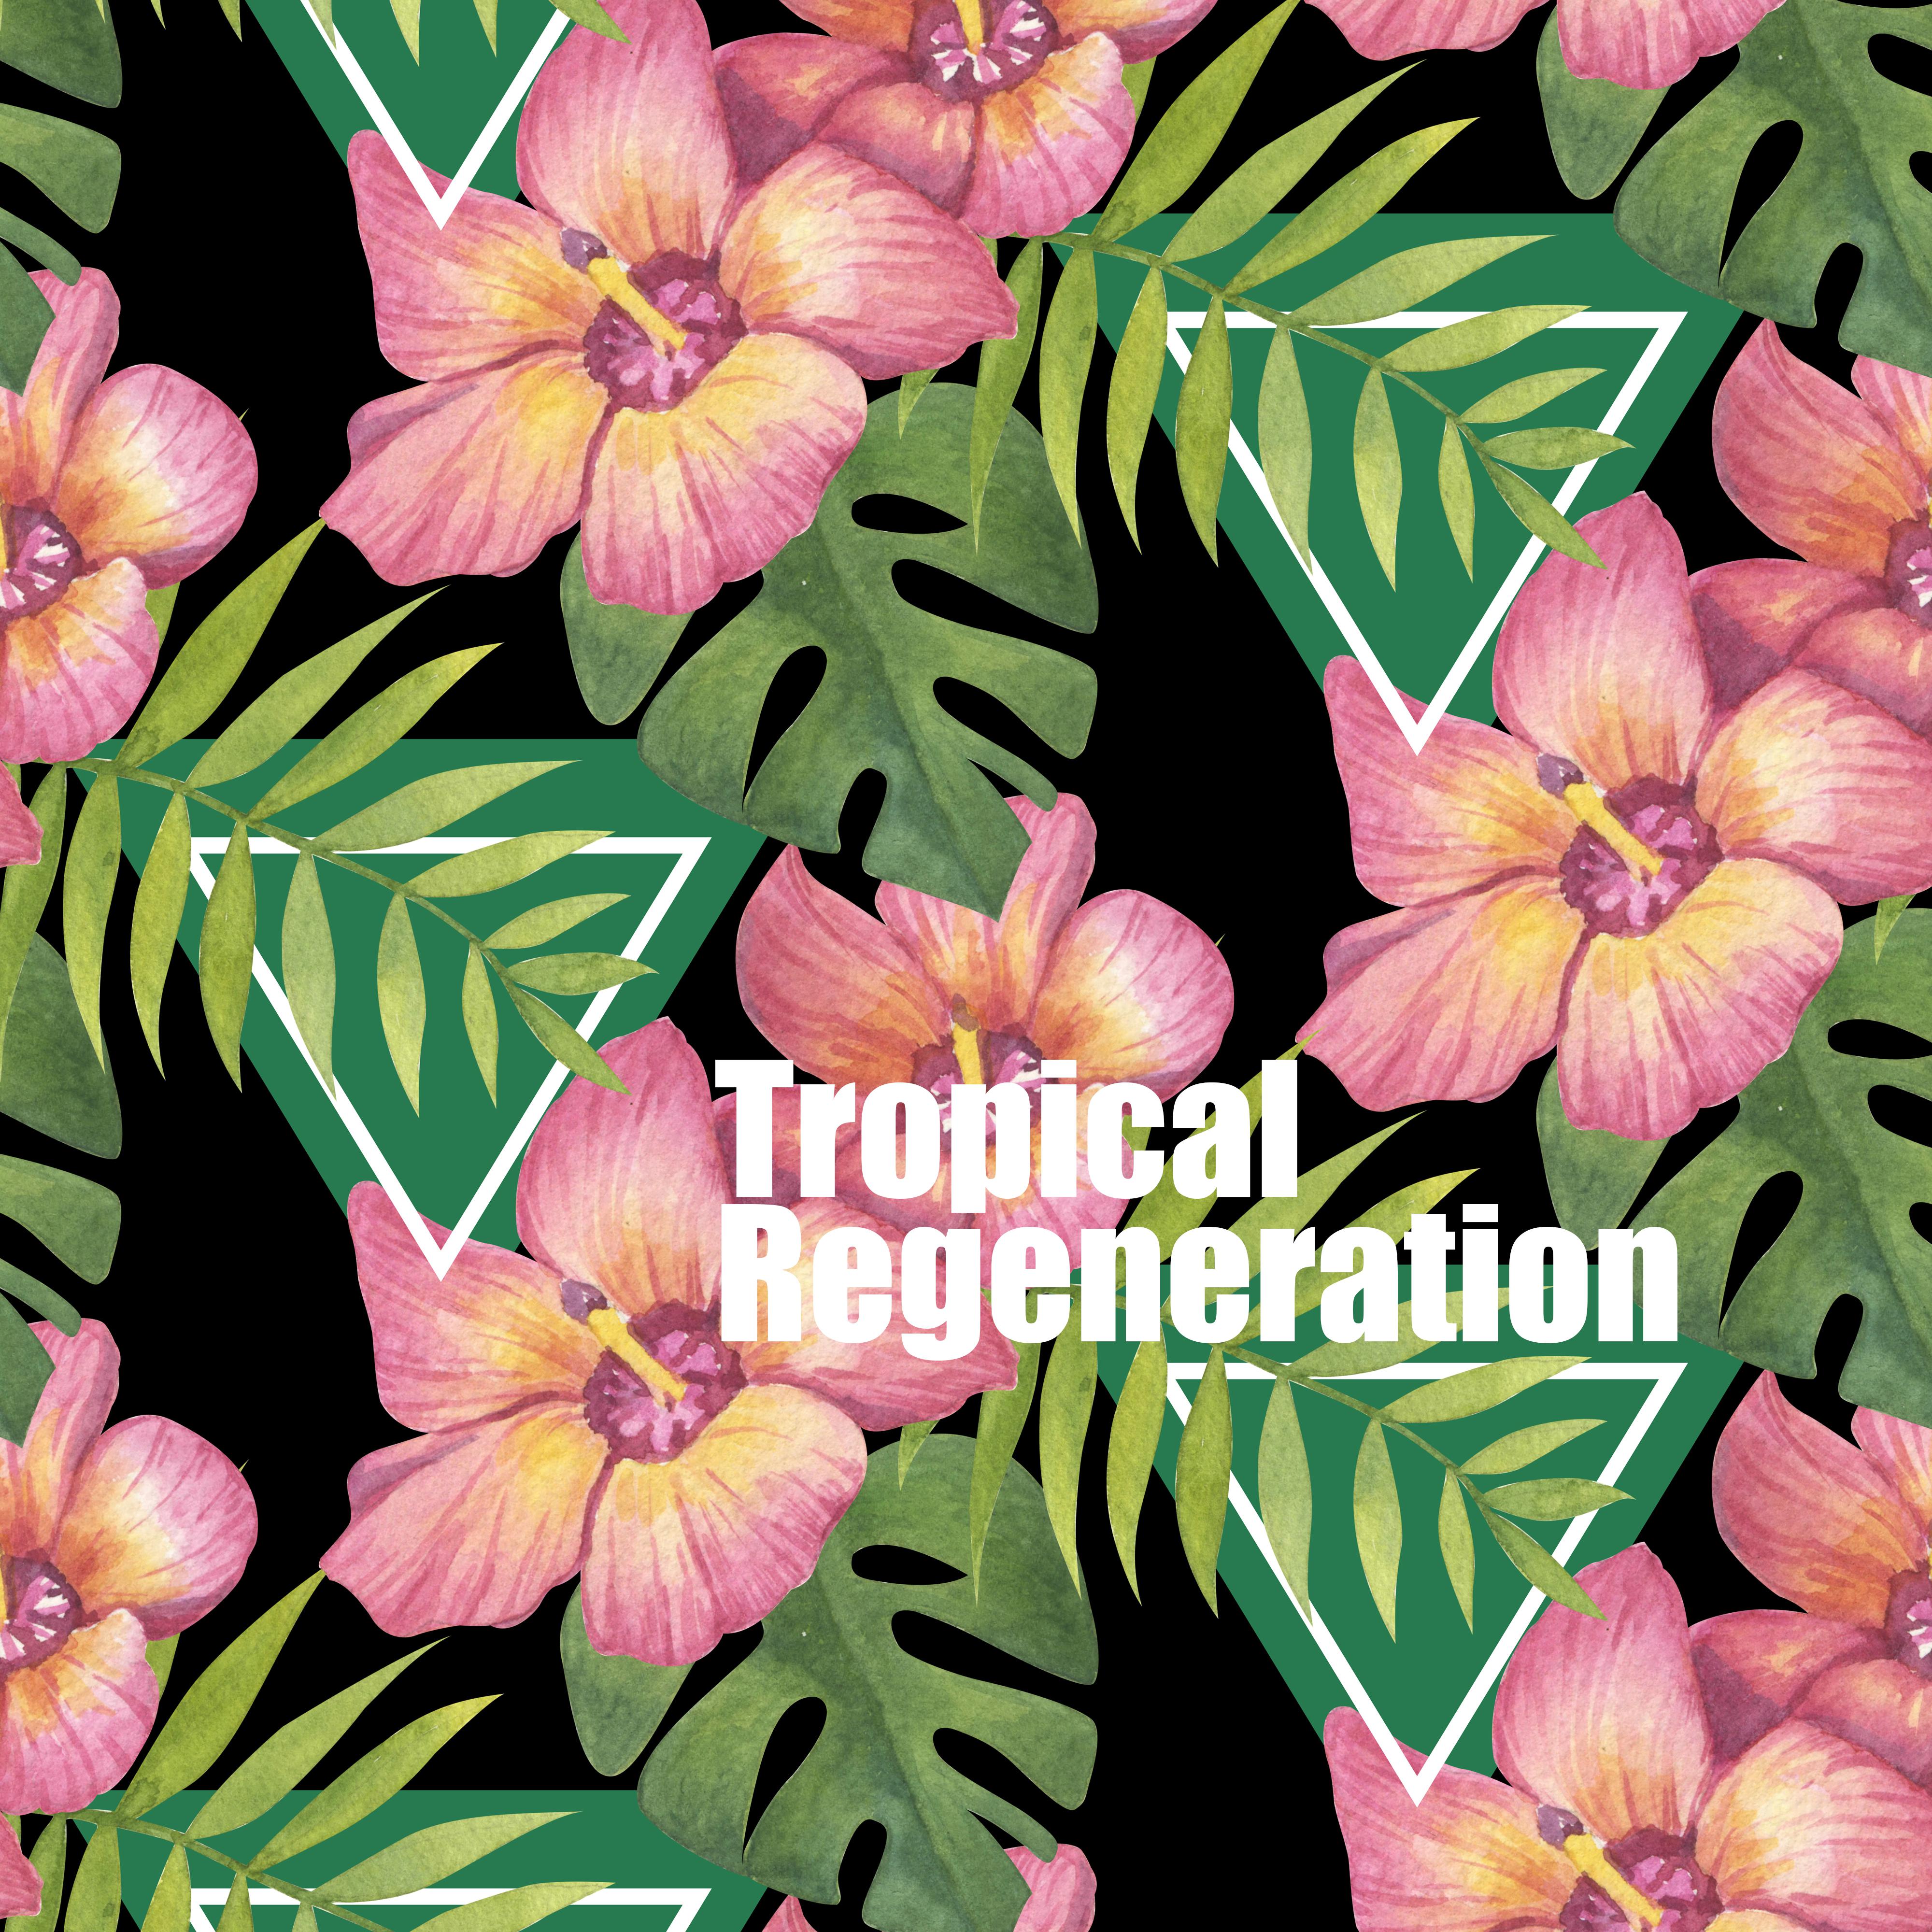 Tropical Regeneration: Ibiza Relaxation, Chill Out 2019, Beach Music, Summer Relaxing Vibes